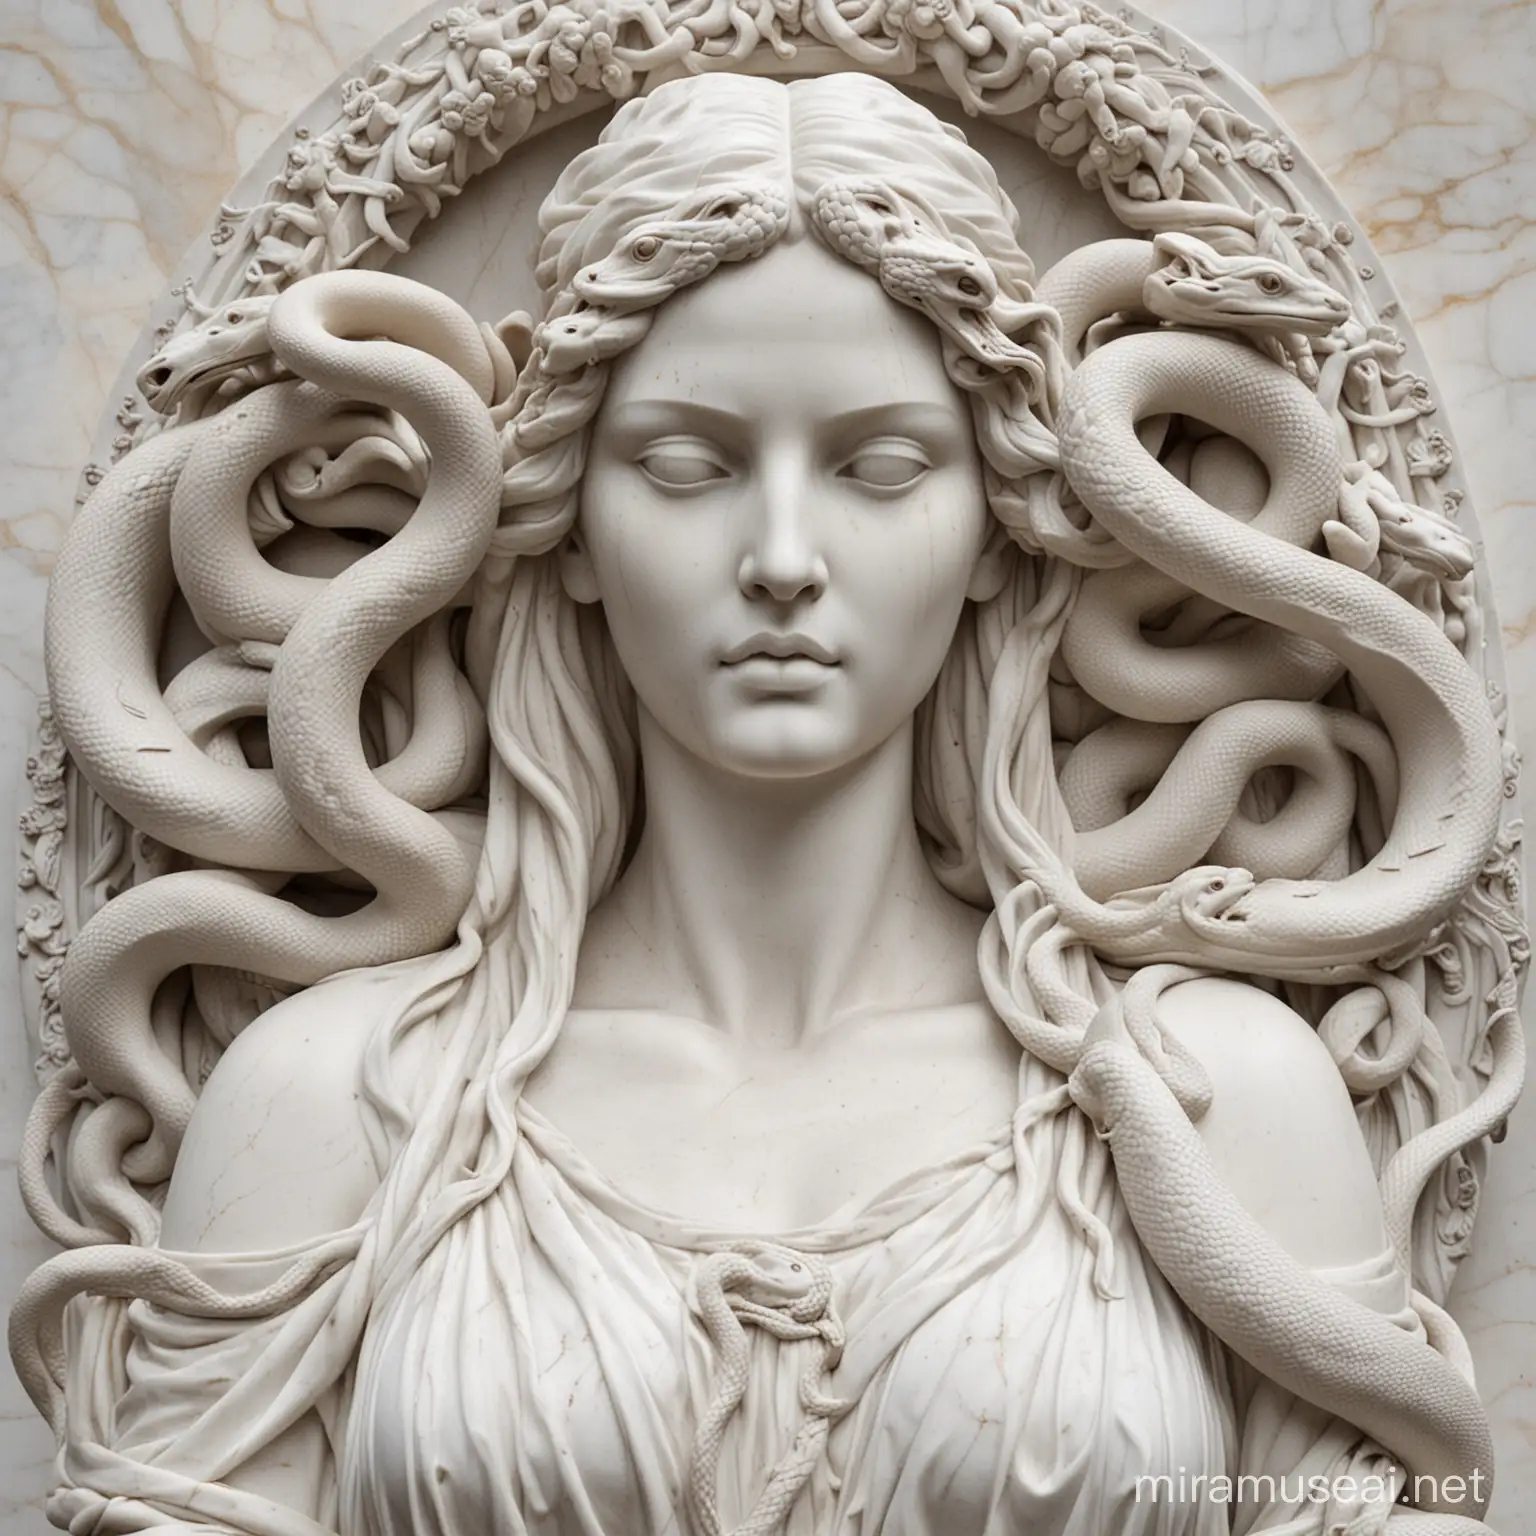 marble stone statue of woman with snakes around it
